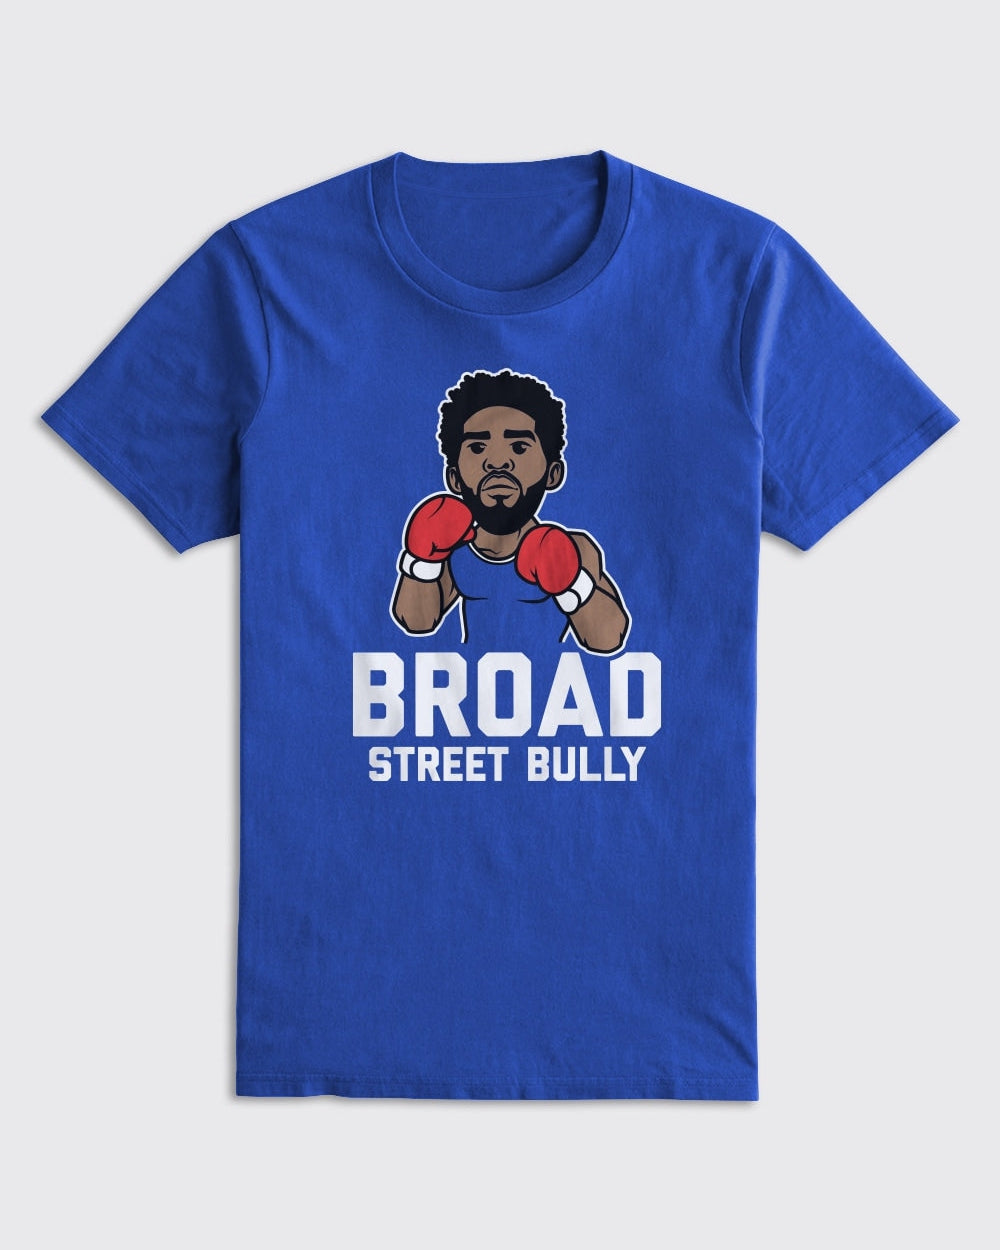 Embiid Broad Street Bully Shirt-Philly Sports Shirts